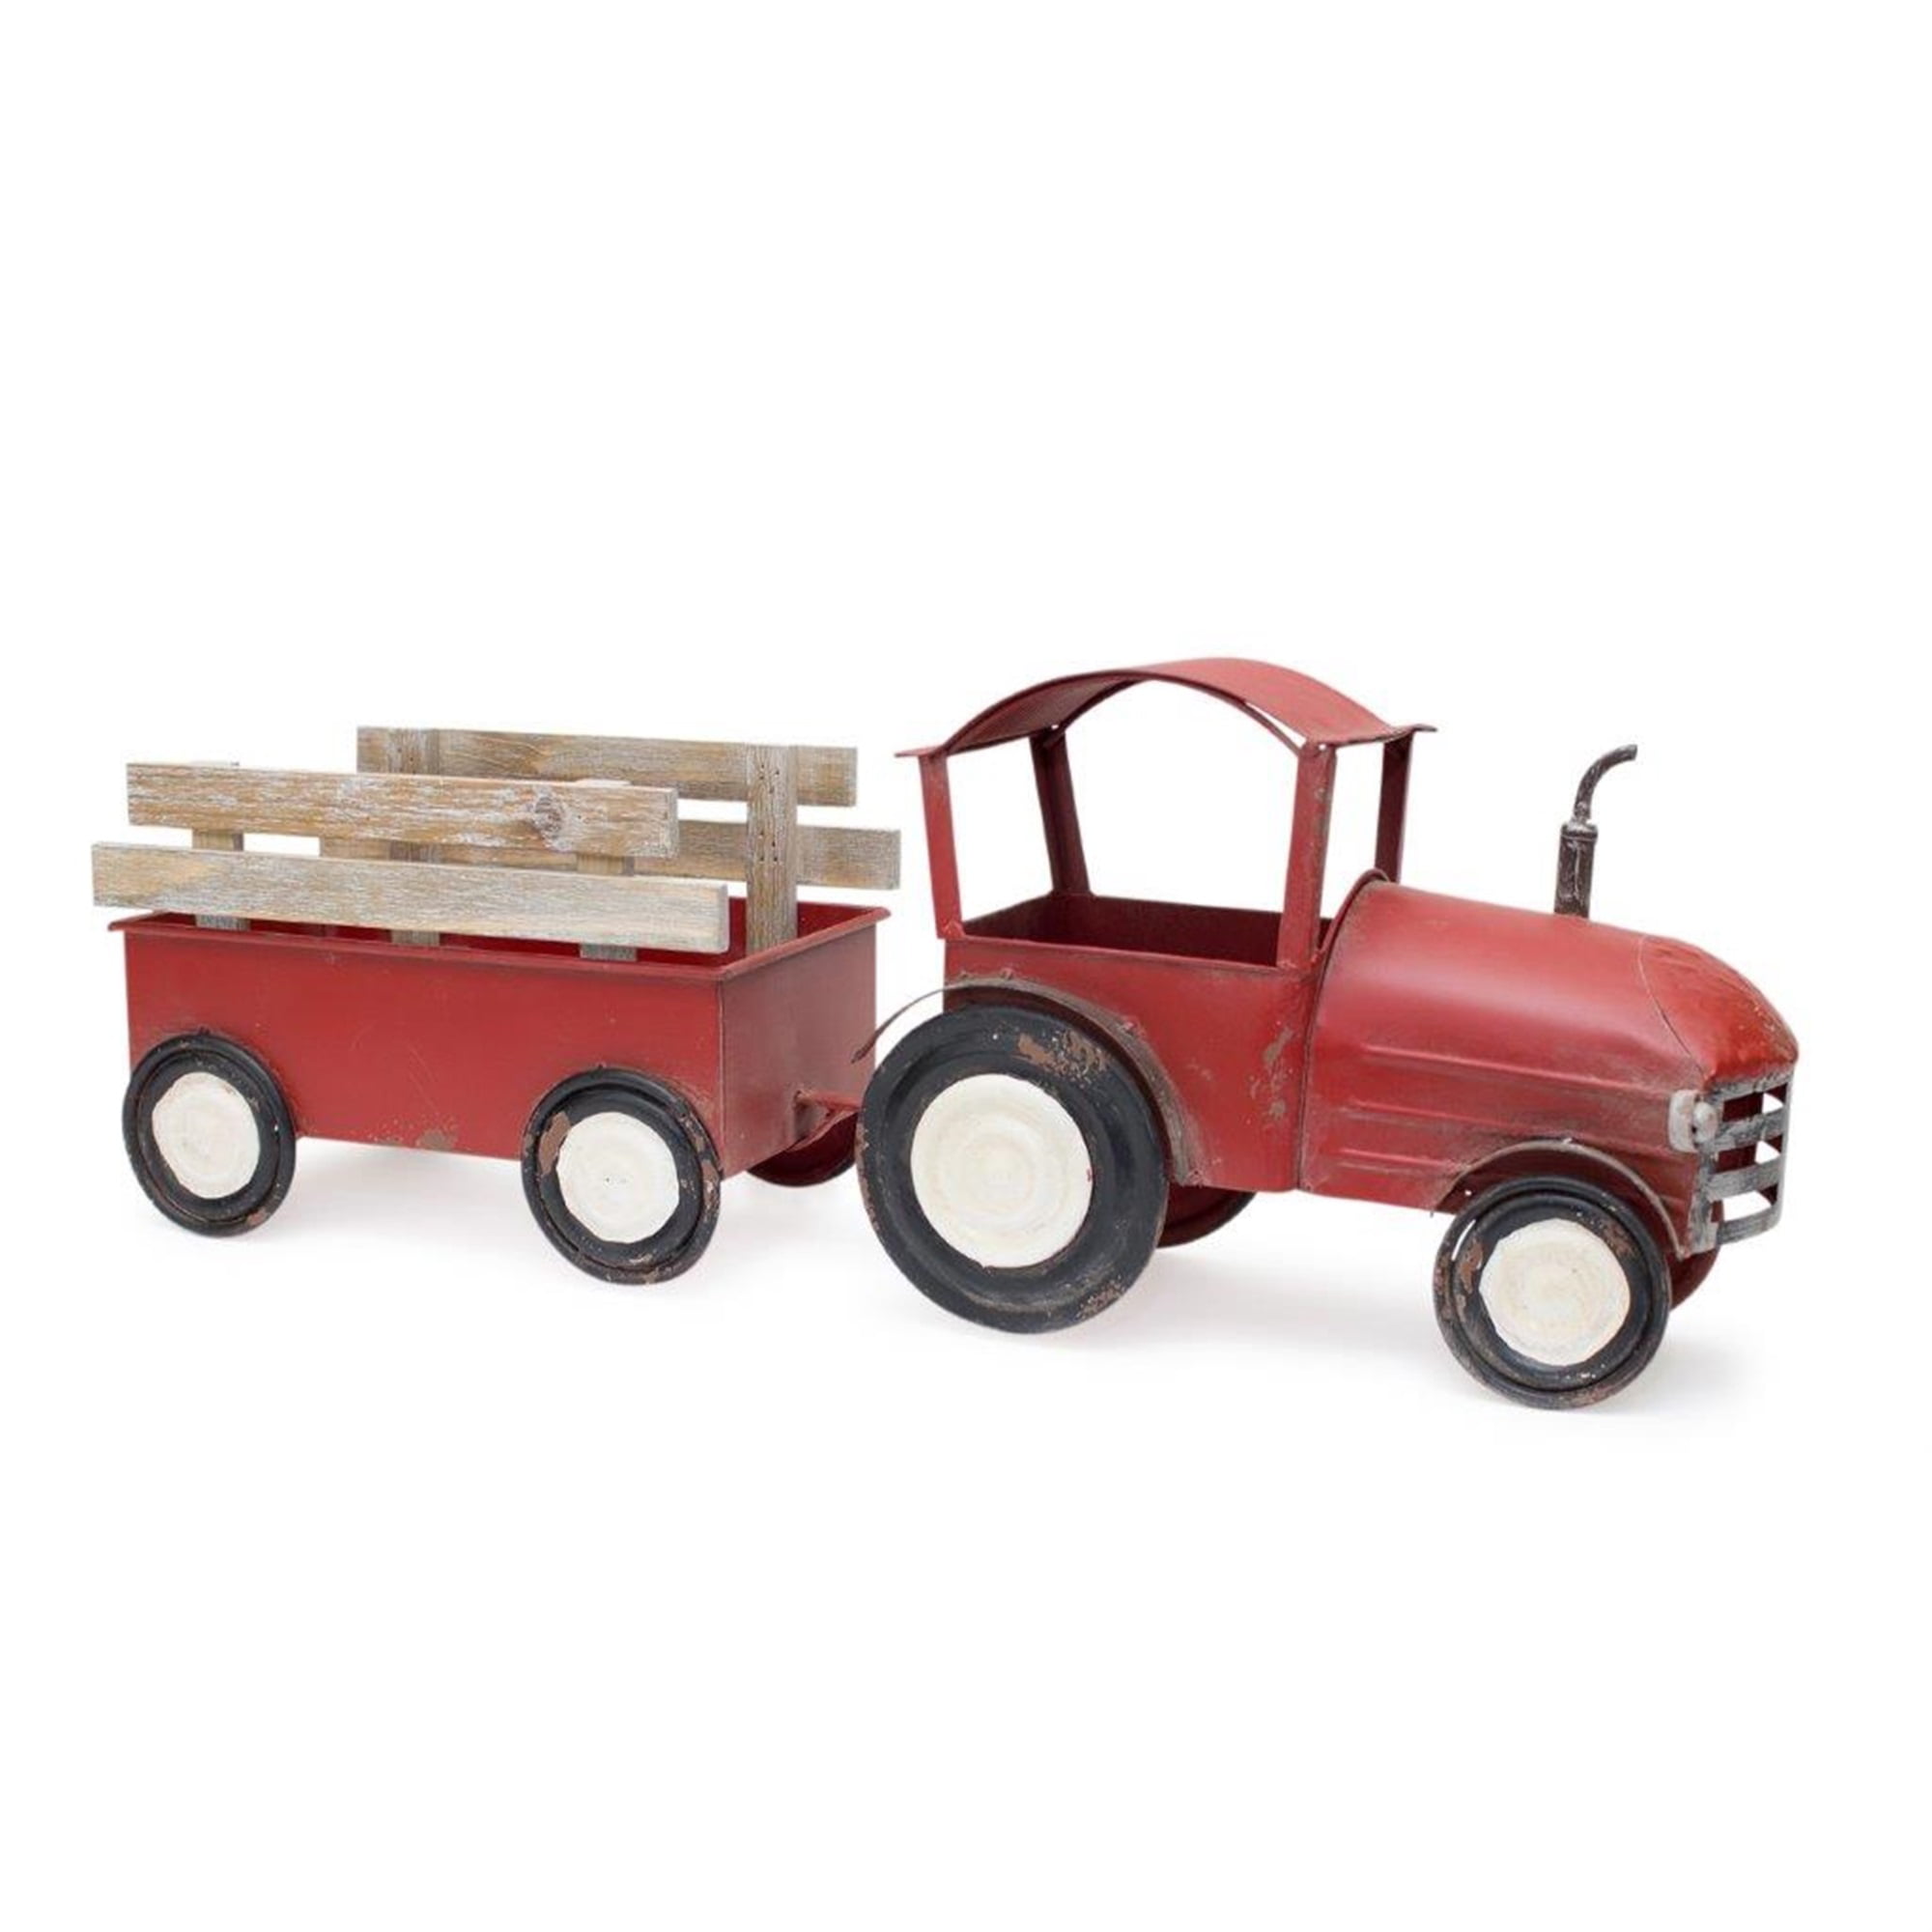 Tractor with Wagon 27.5"L x 10.25"H Iron/Wood